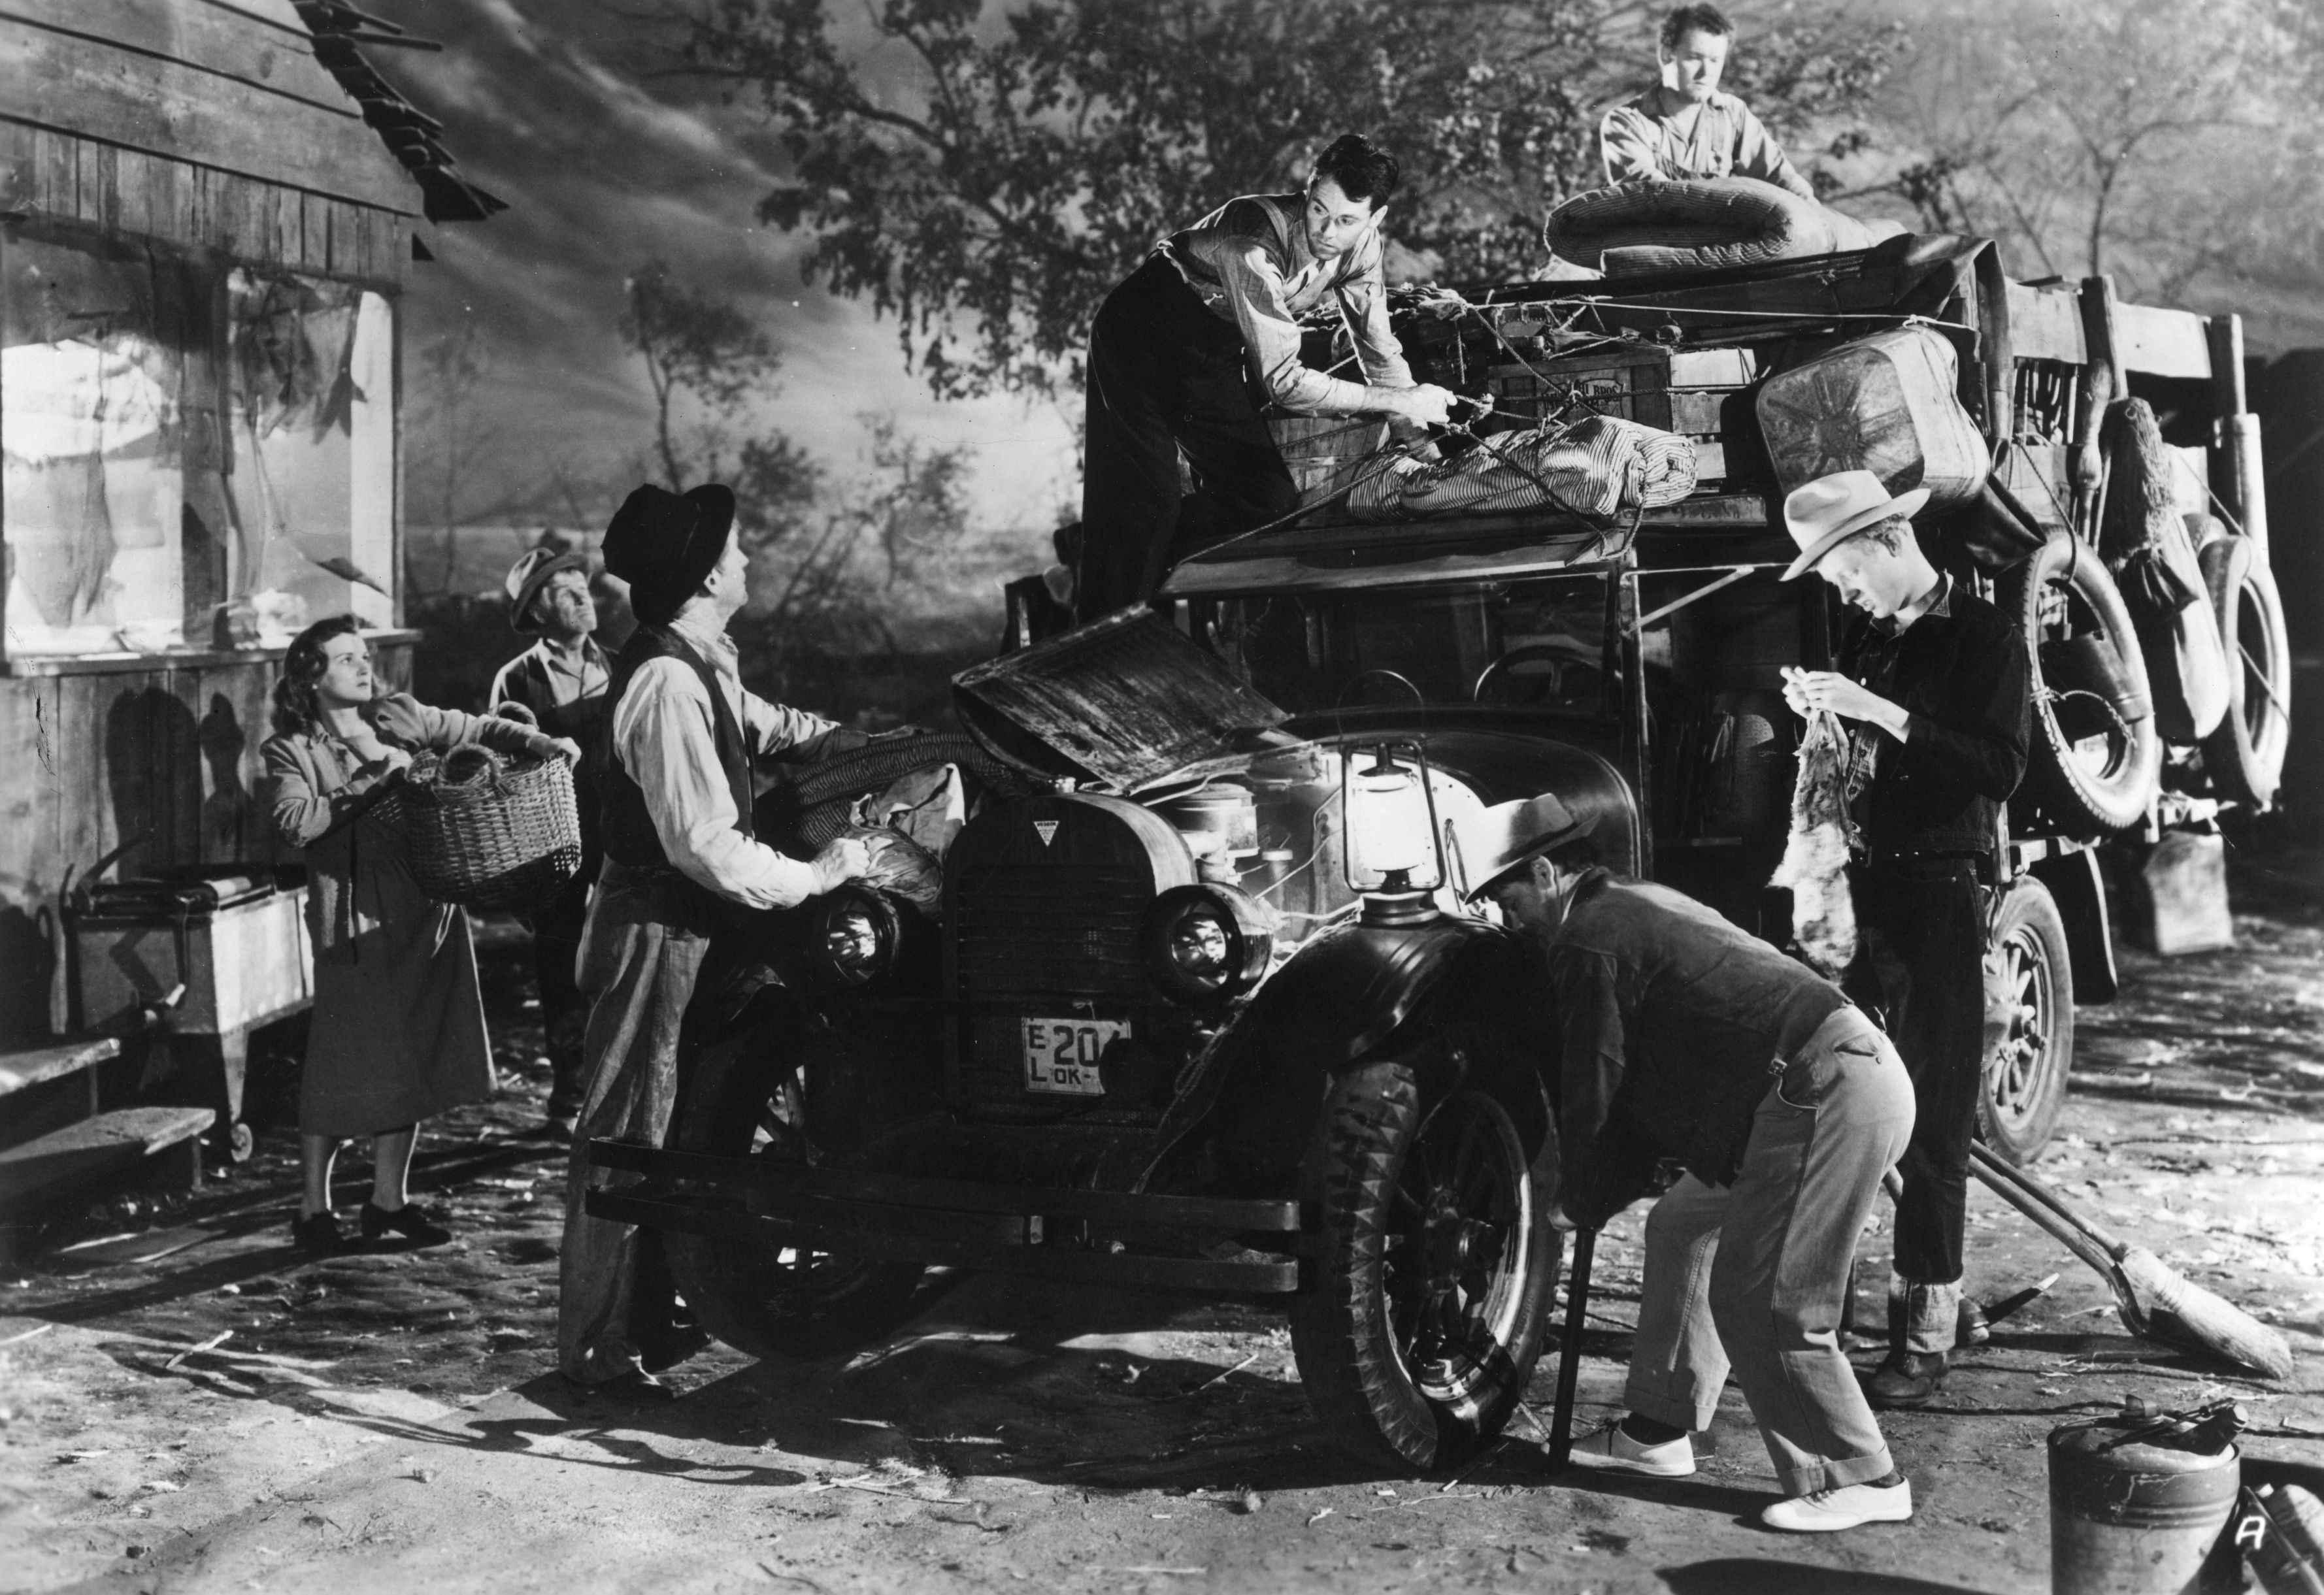 Henry Fonda, Dorris Bowdon, Frank Darien, Eddie Quillan, Russell Simpson, Frank Sully, and O.Z. Whitehead in The Grapes of Wrath (1940)